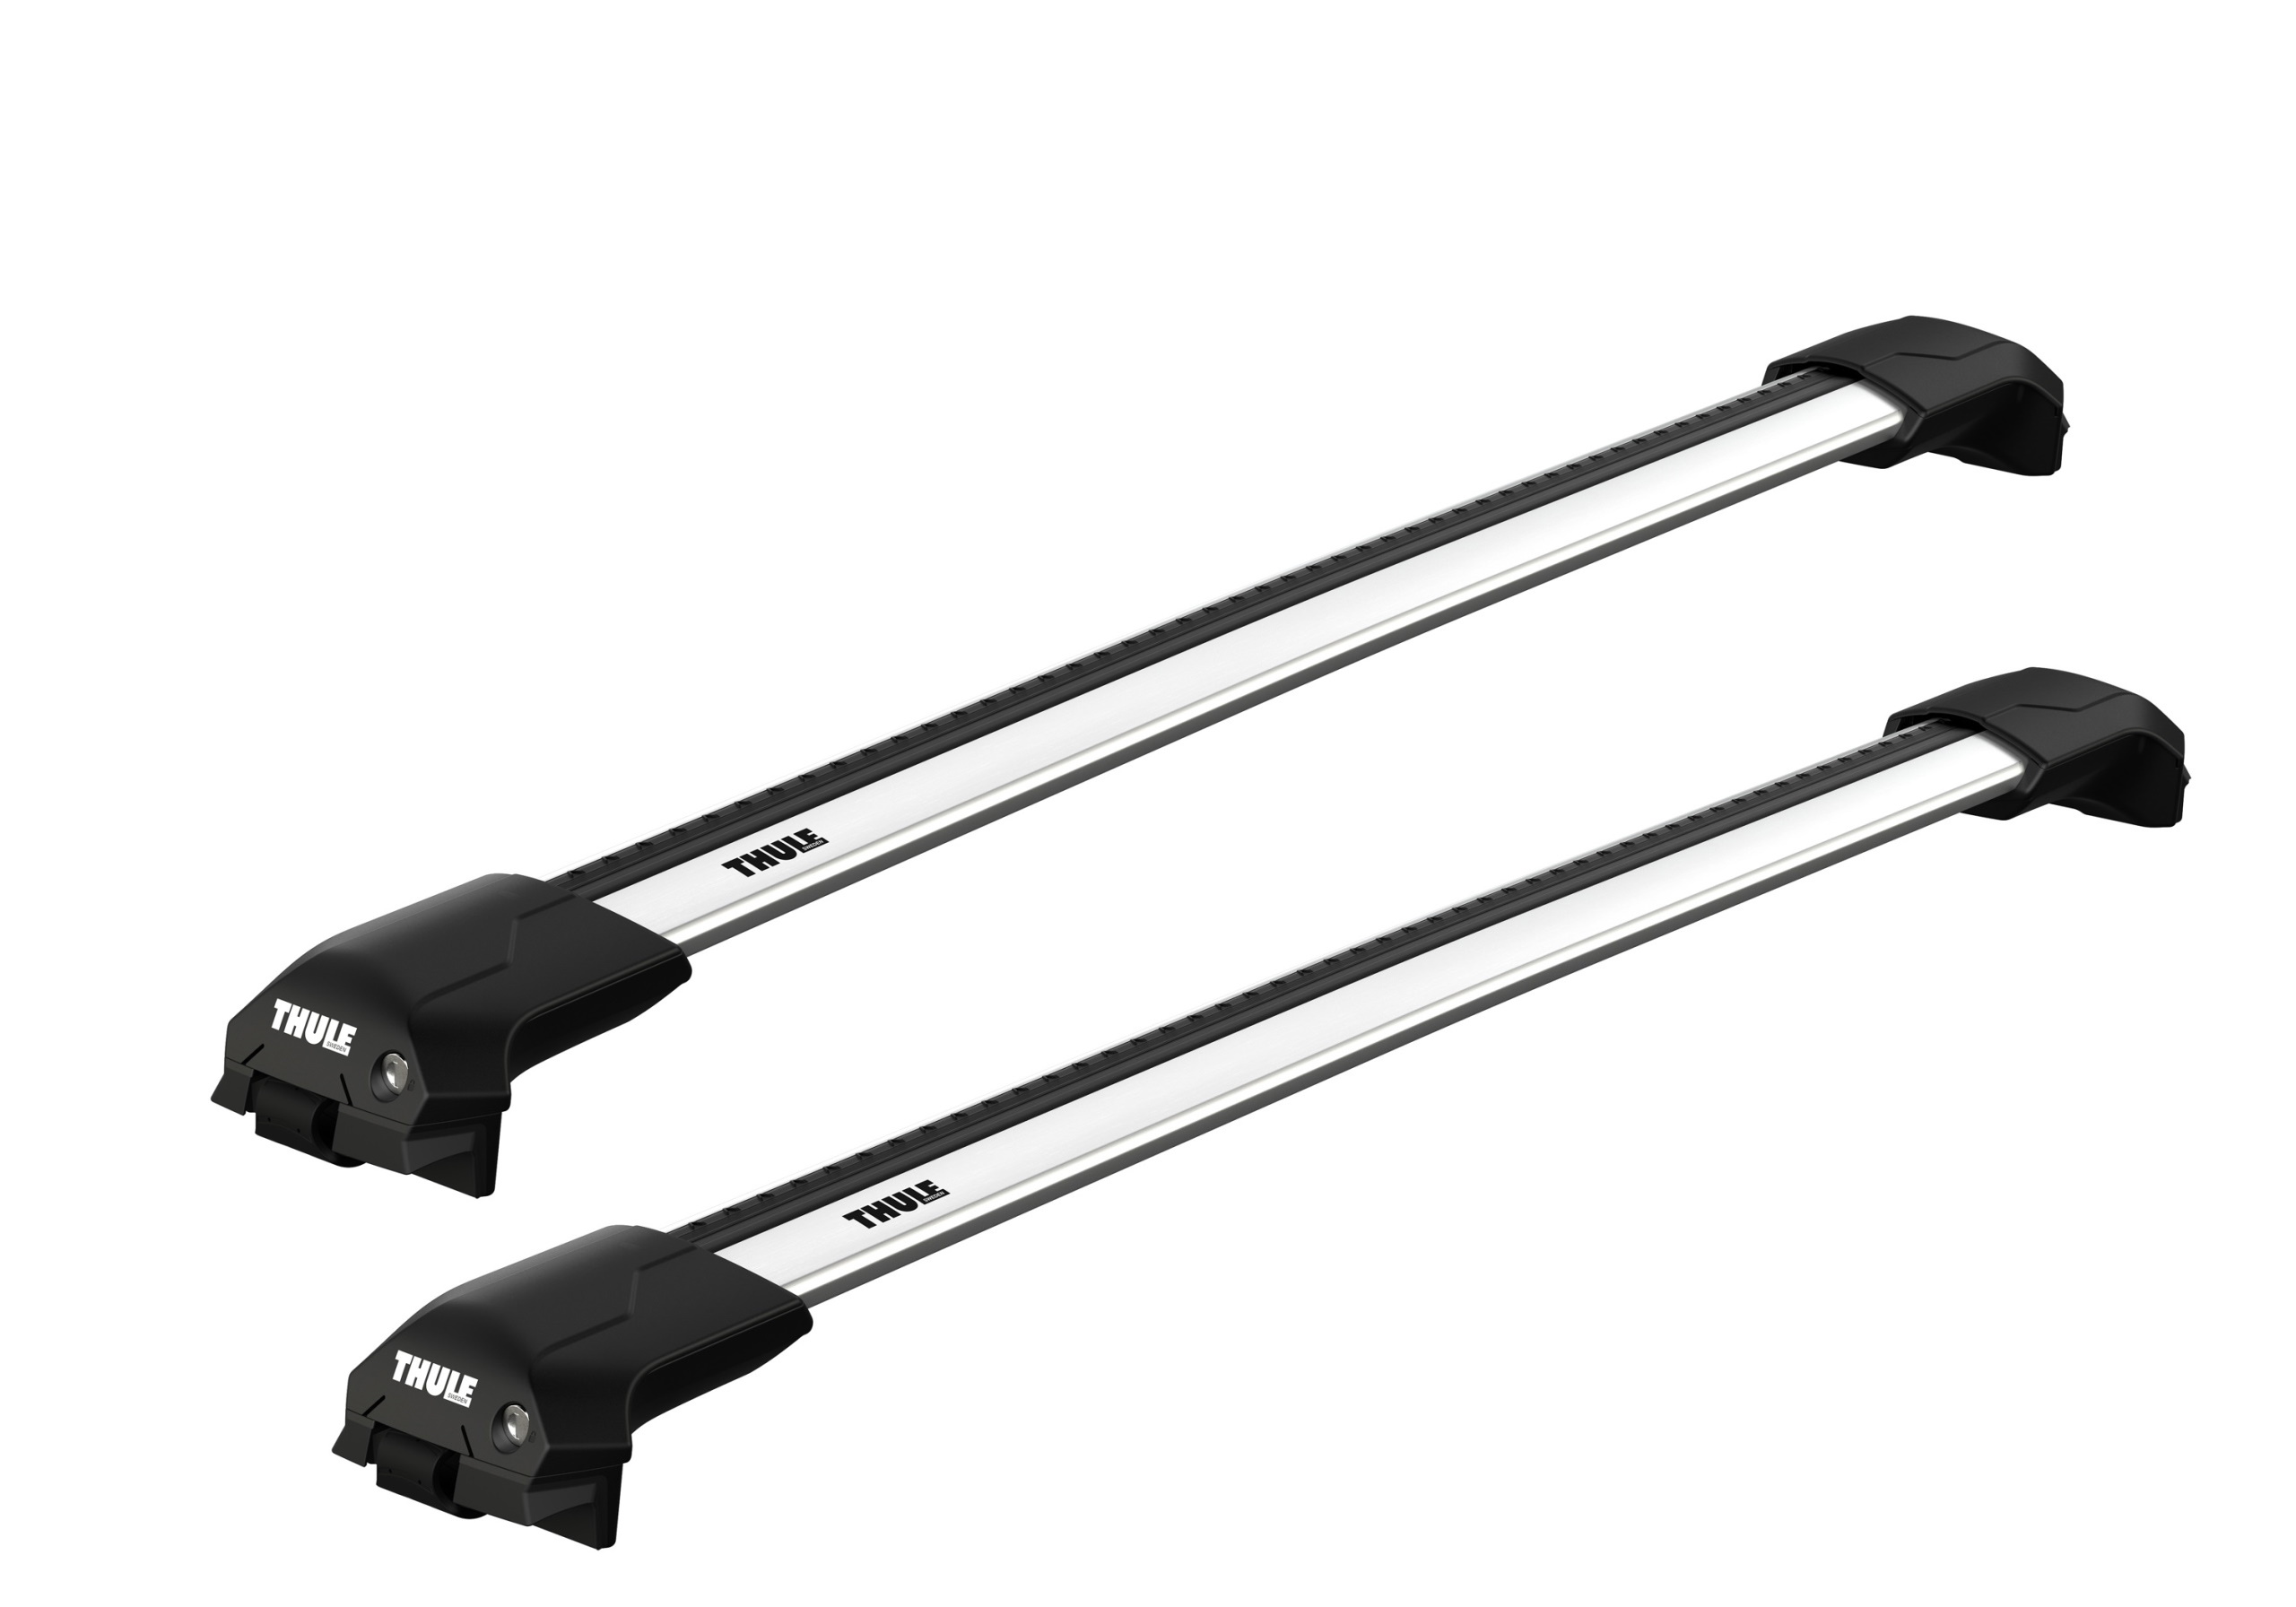 Audi A4 Allroad (2009 to 2016):Thule Edge silver WingBars package - 7204, 7213, 7213